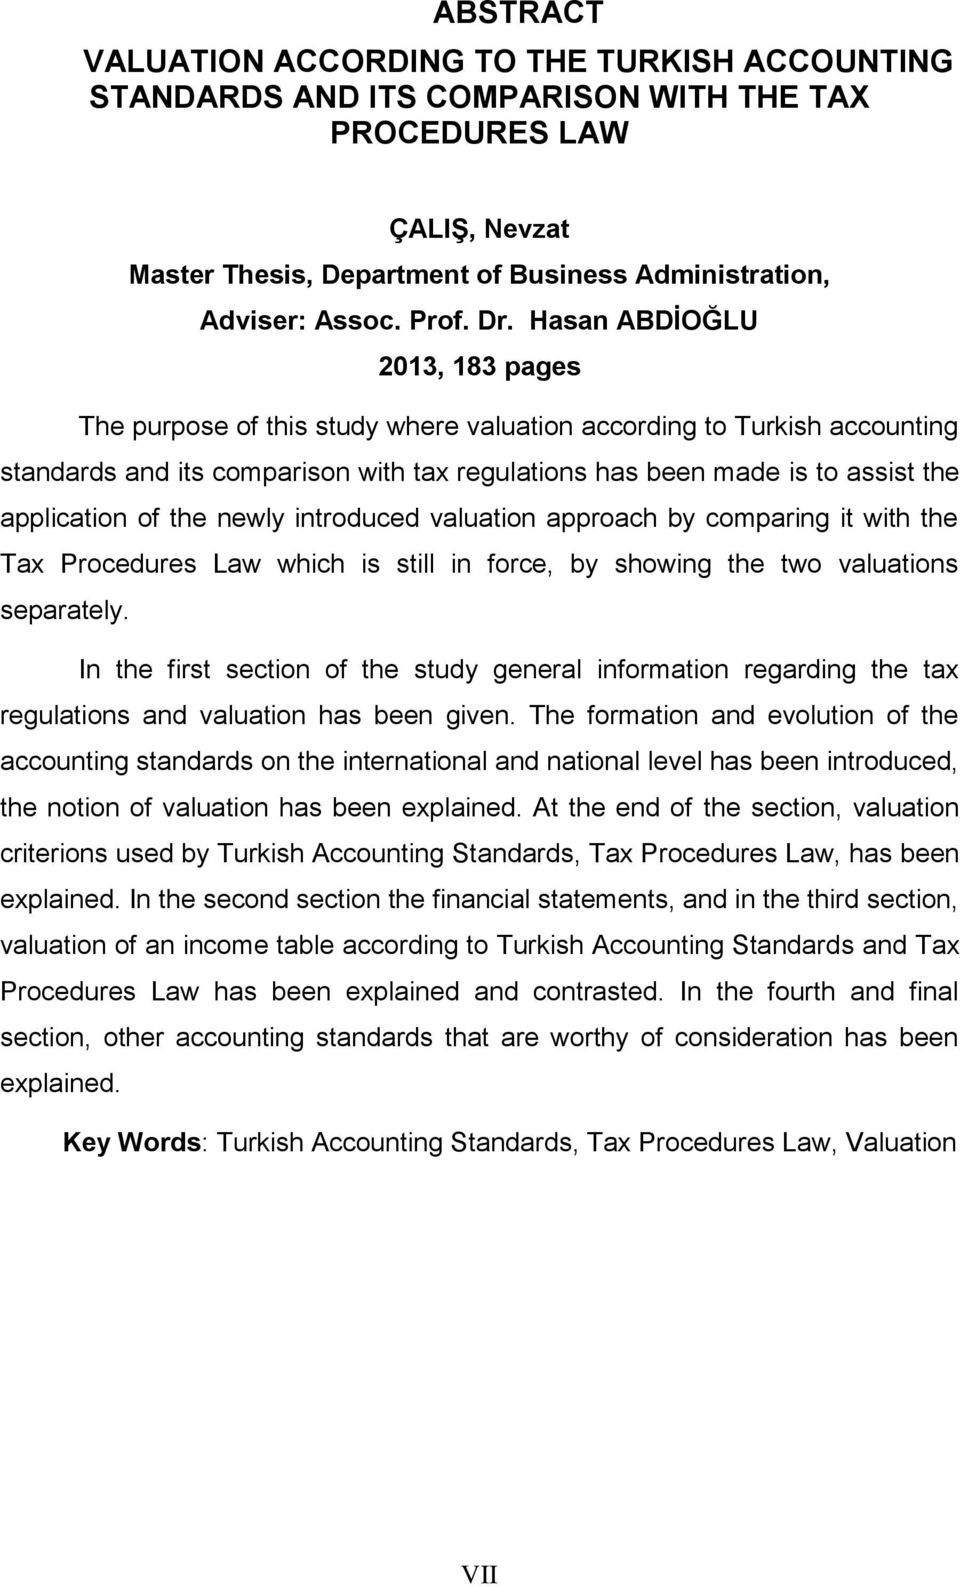 Hasan ABDİOĞLU 2013, 183 pages The purpose of this study where valuation according to Turkish accounting standards and its comparison with tax regulations has been made is to assist the application